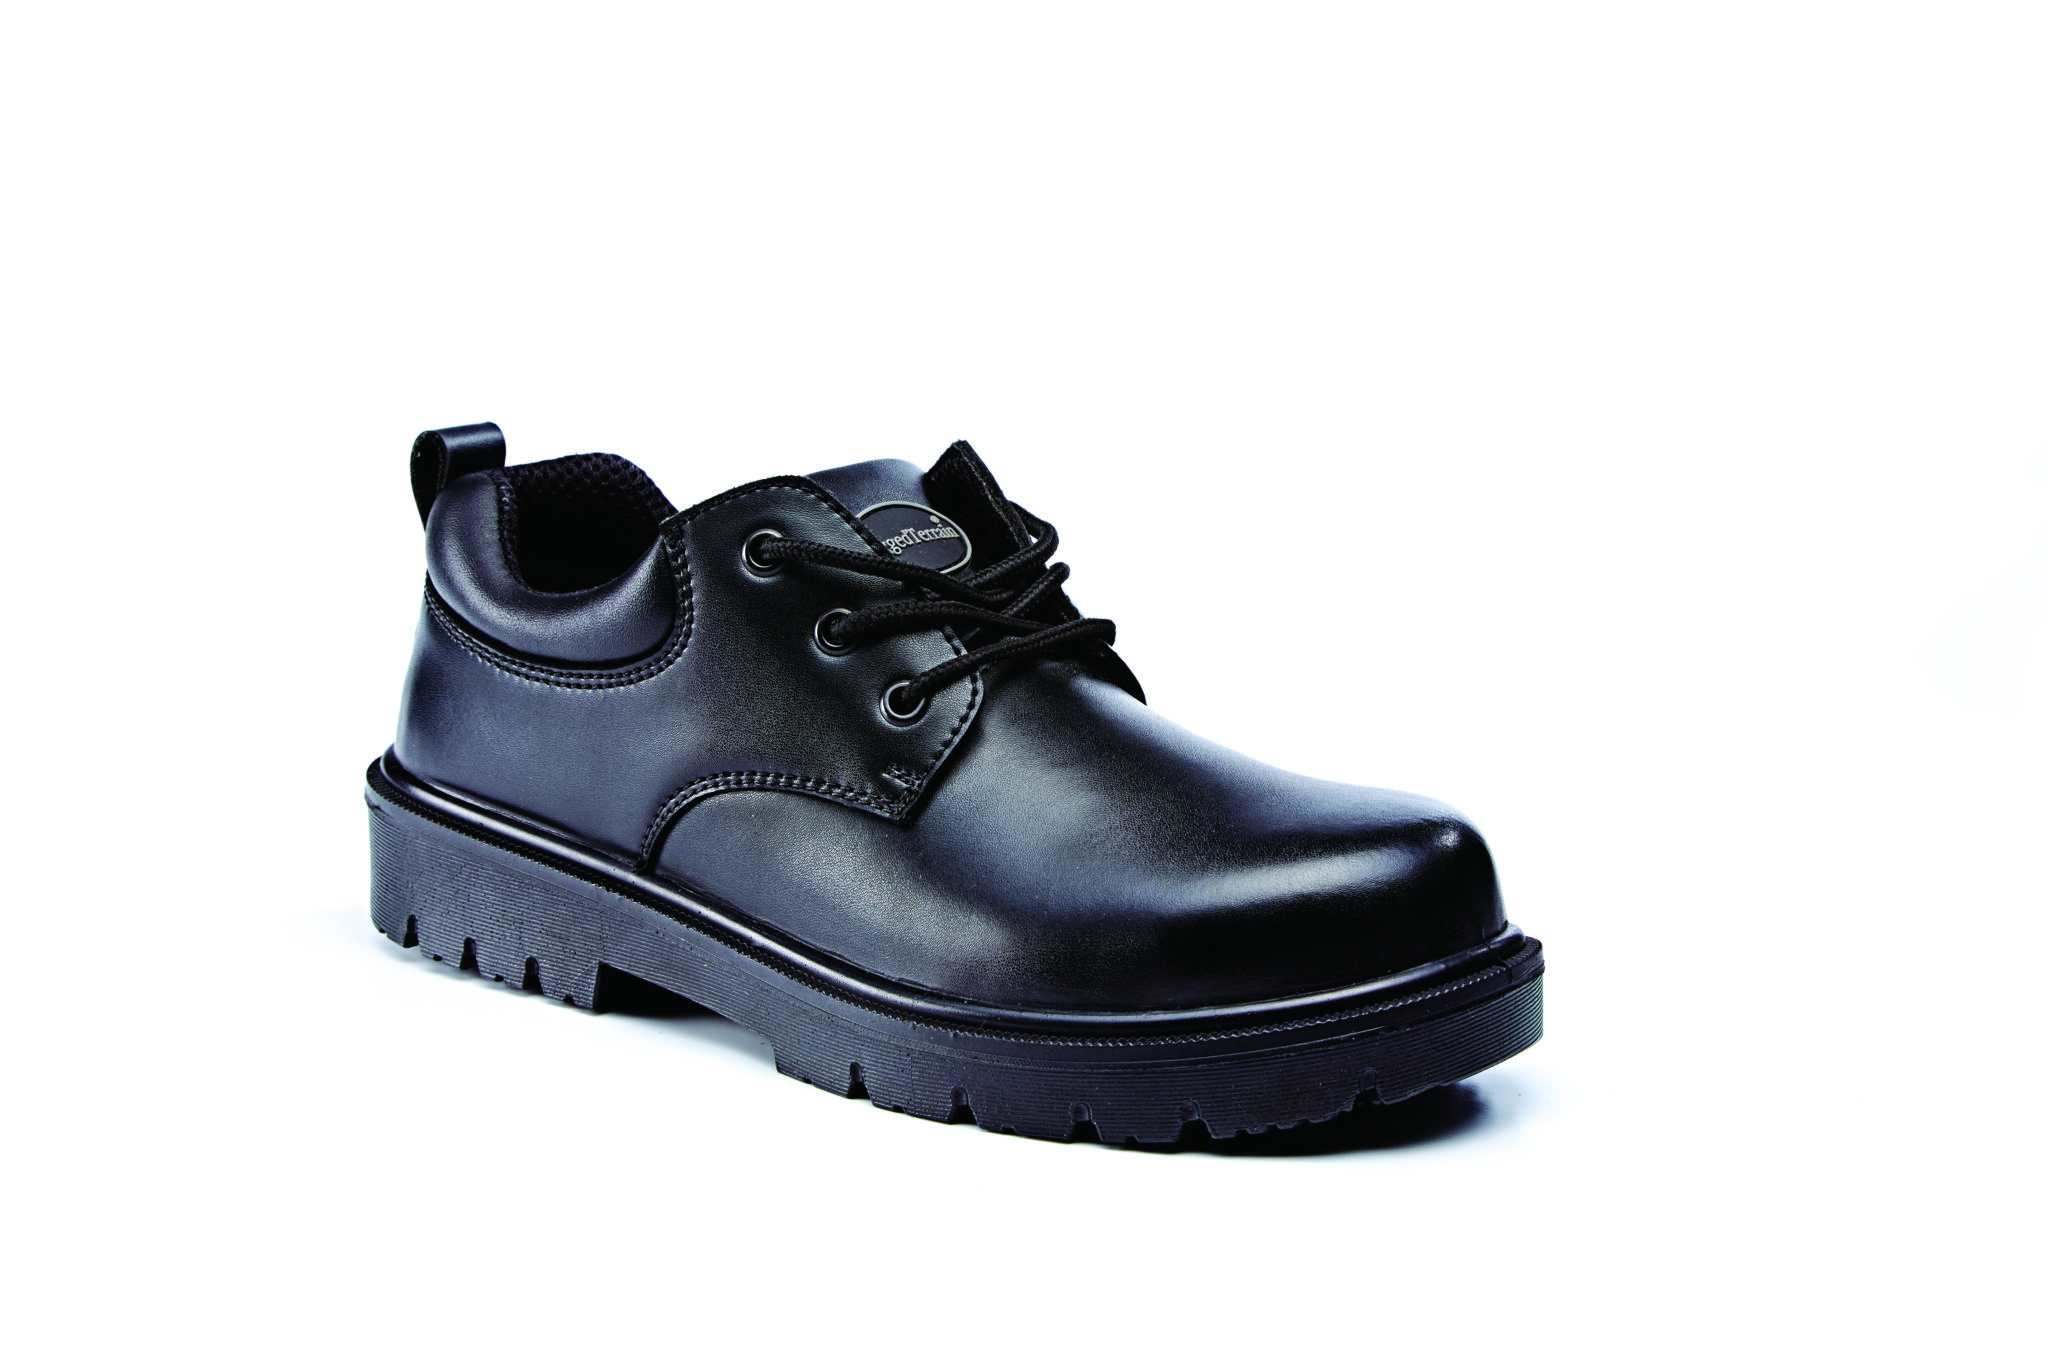 all black leather work shoes